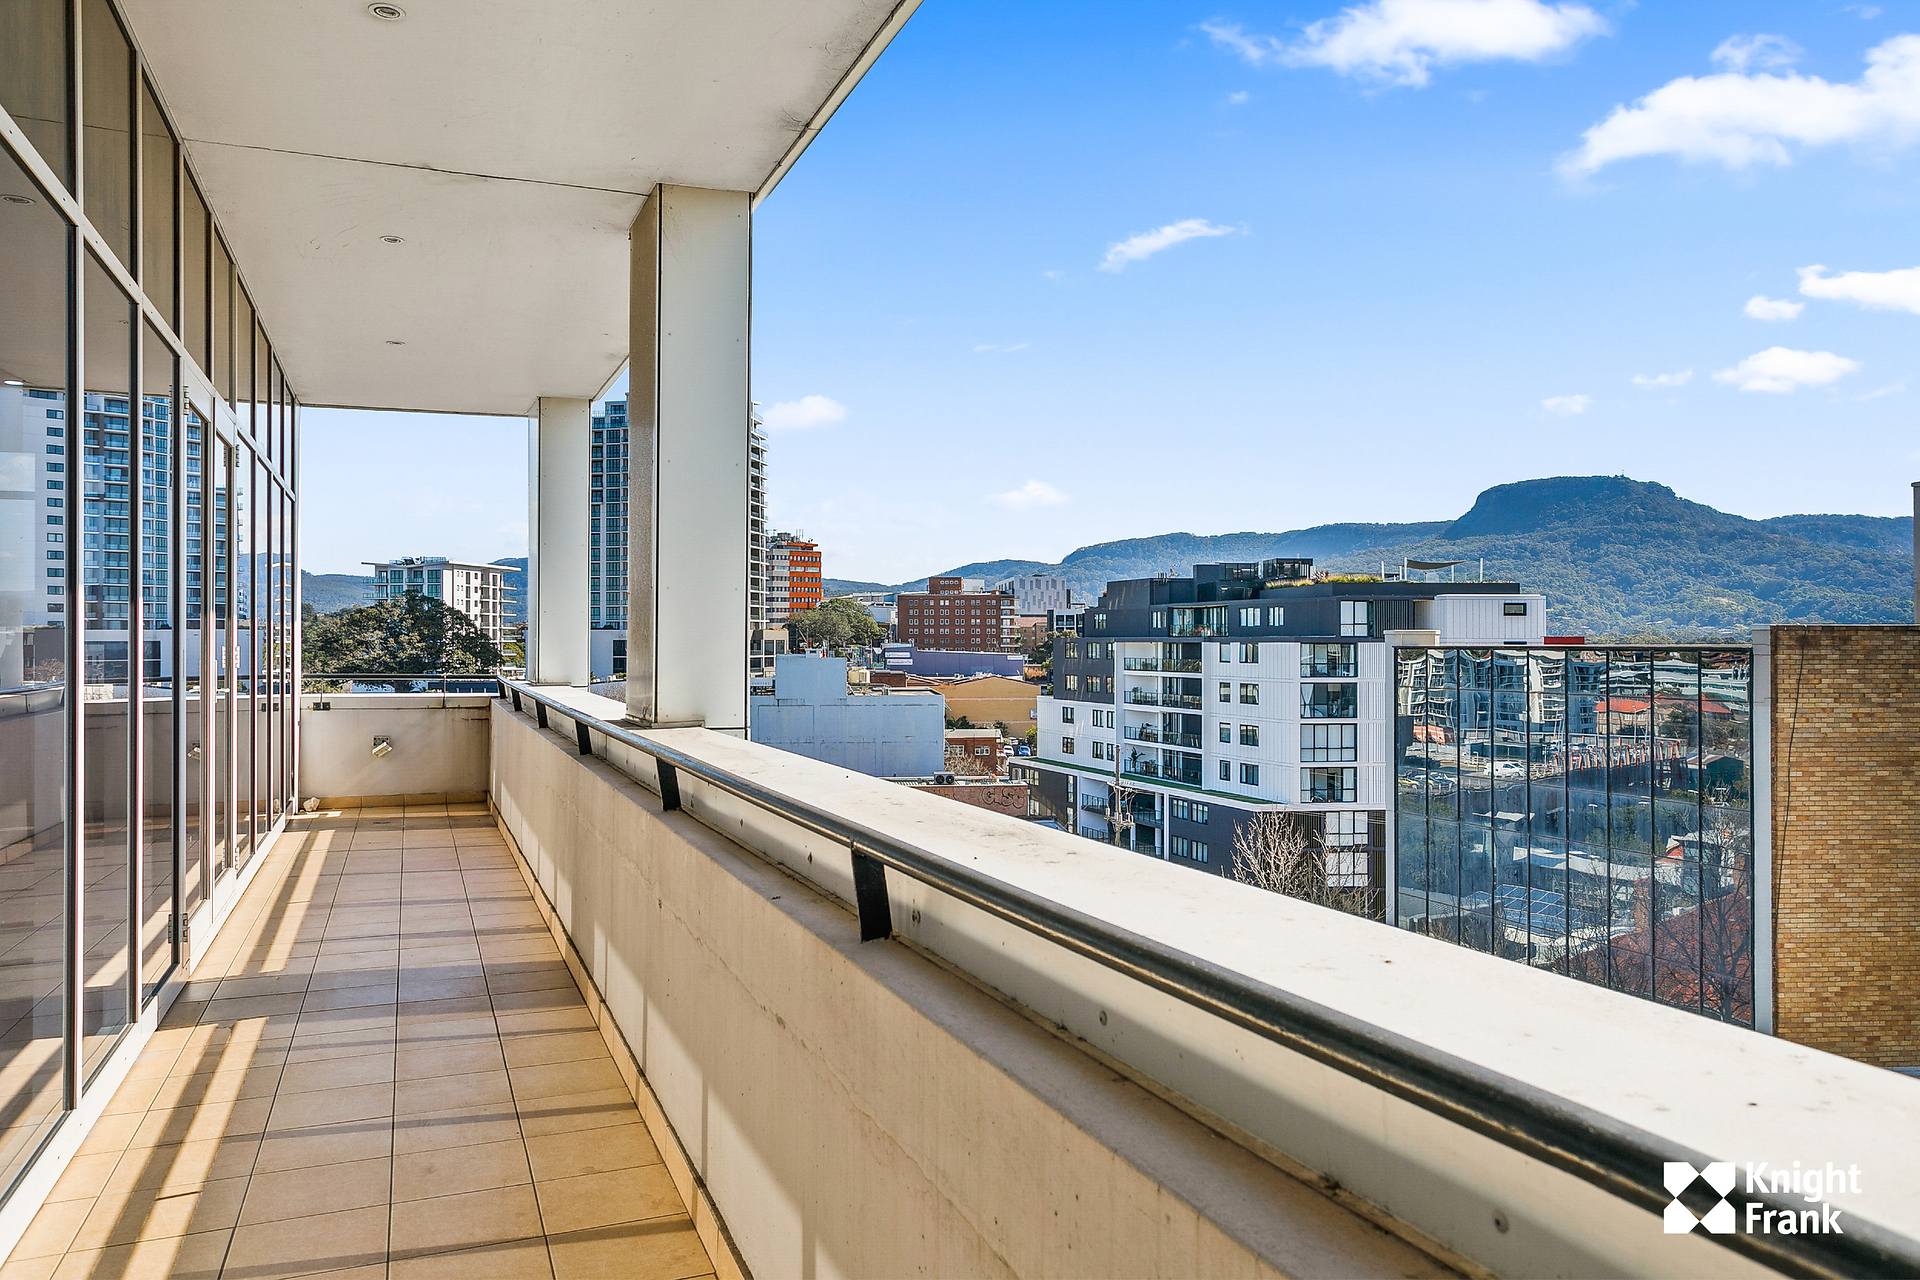 325-327 Crown Street, Wollongong For Sale by Knight Frank Australia - image 1